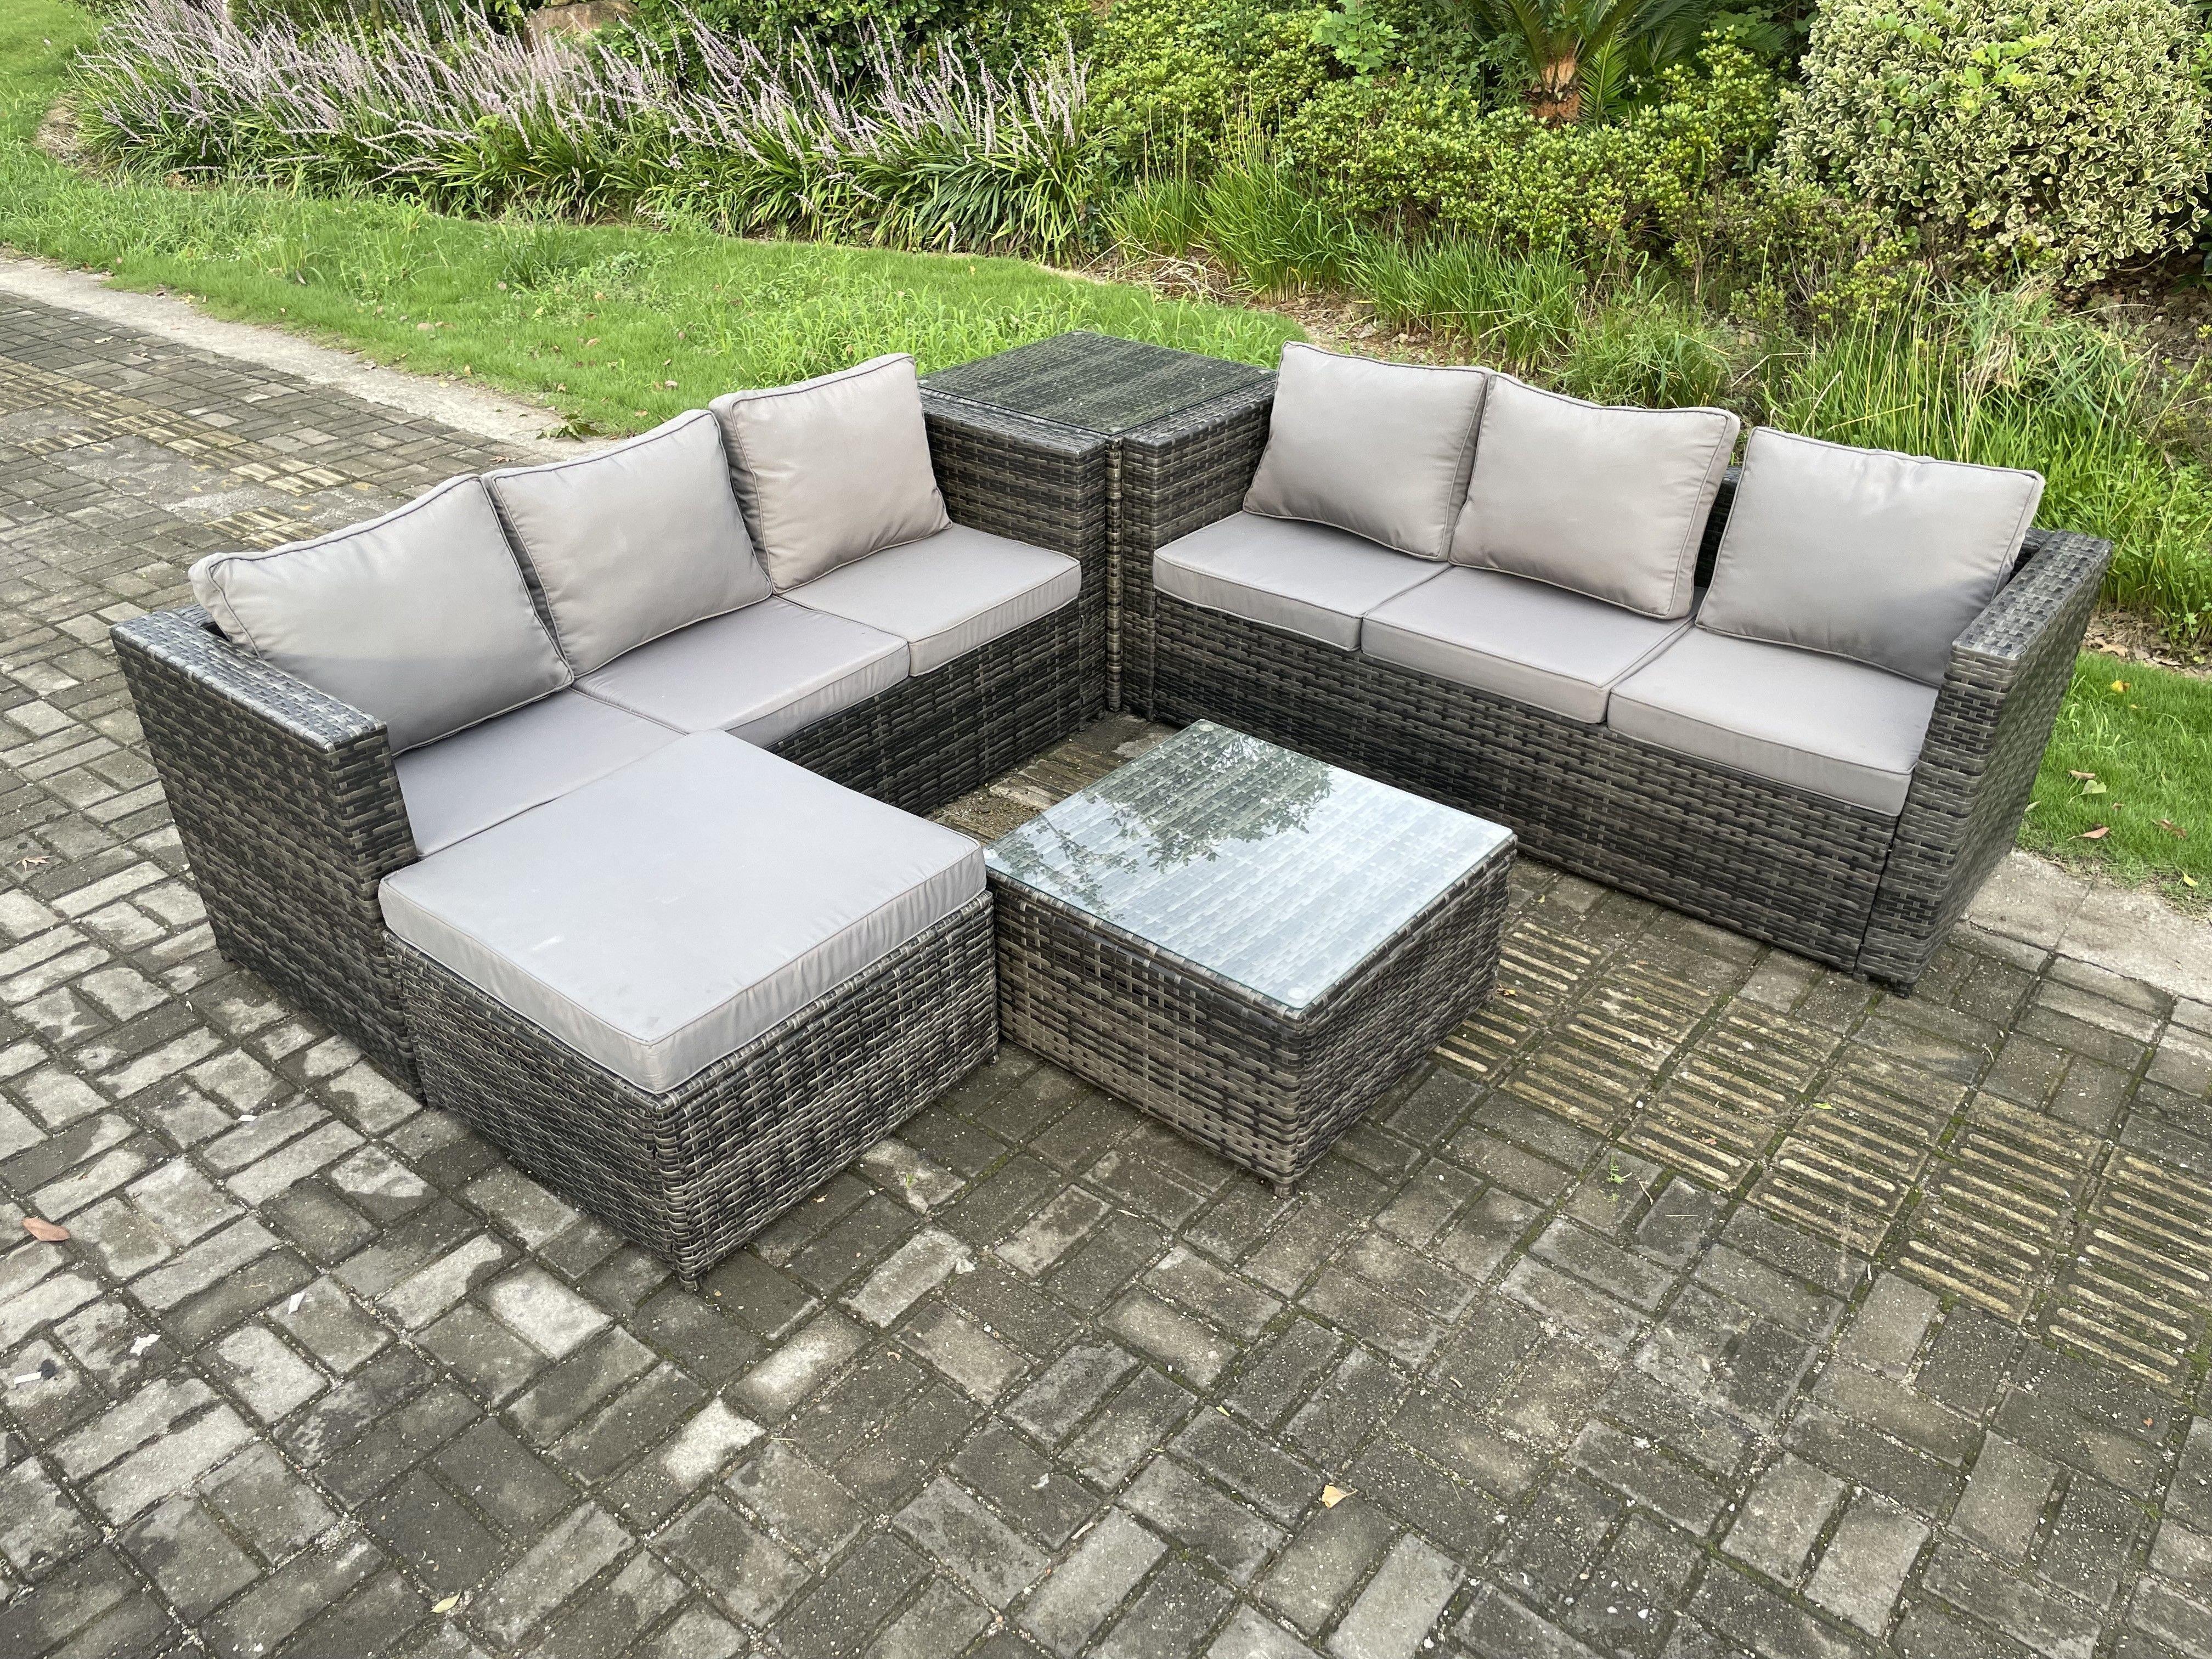 7 Seater Rattan Garden Furniture Sofa Set with Side Table Square Coffee Table Big Footstool Indoor O